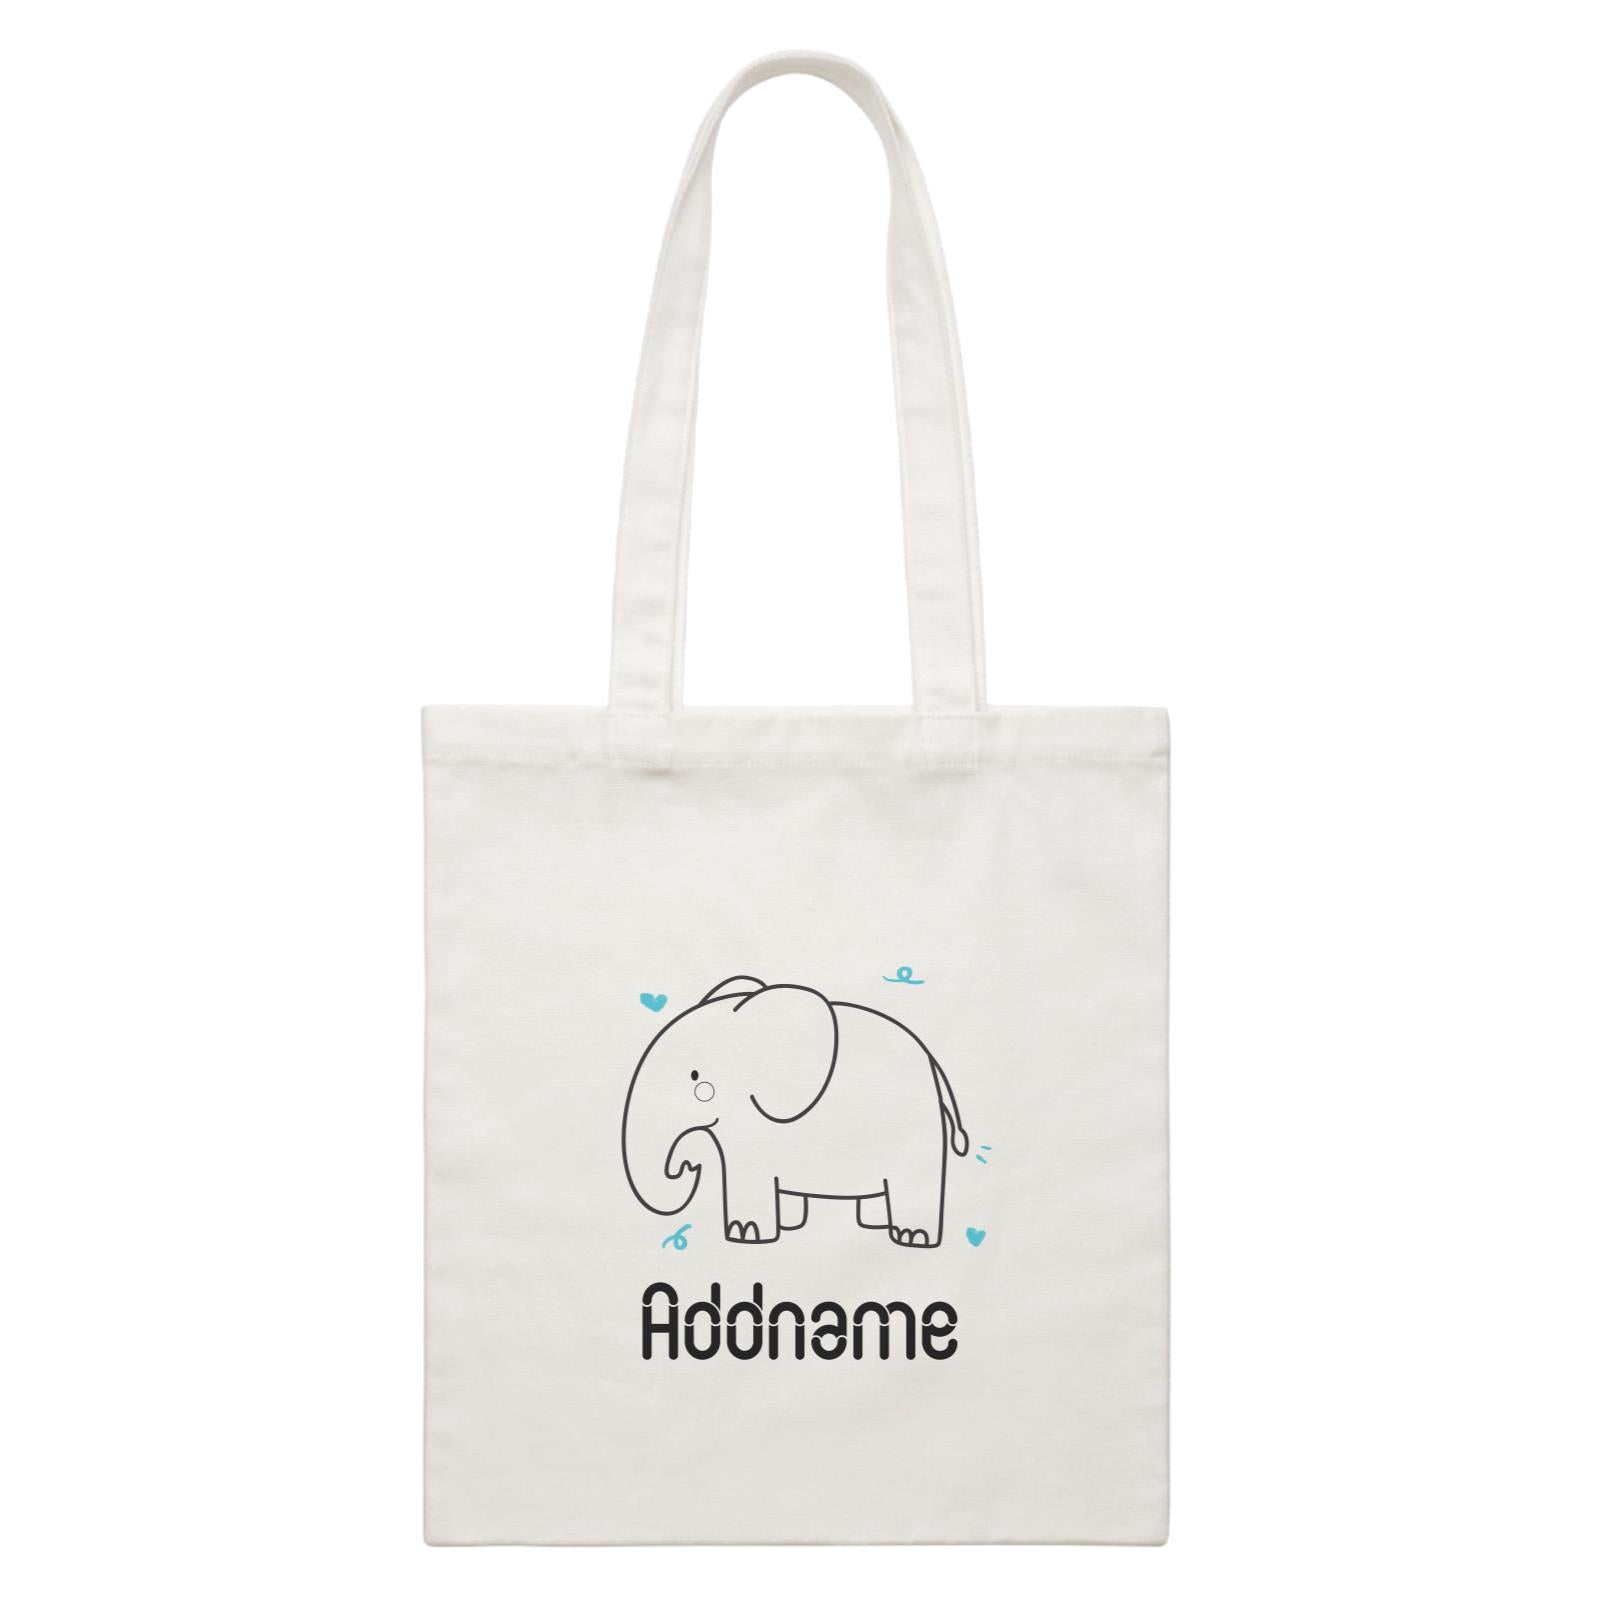 Coloring Outline Cute Hand Drawn Animals Elephants Blue Elephants Addname White White Canvas Bag